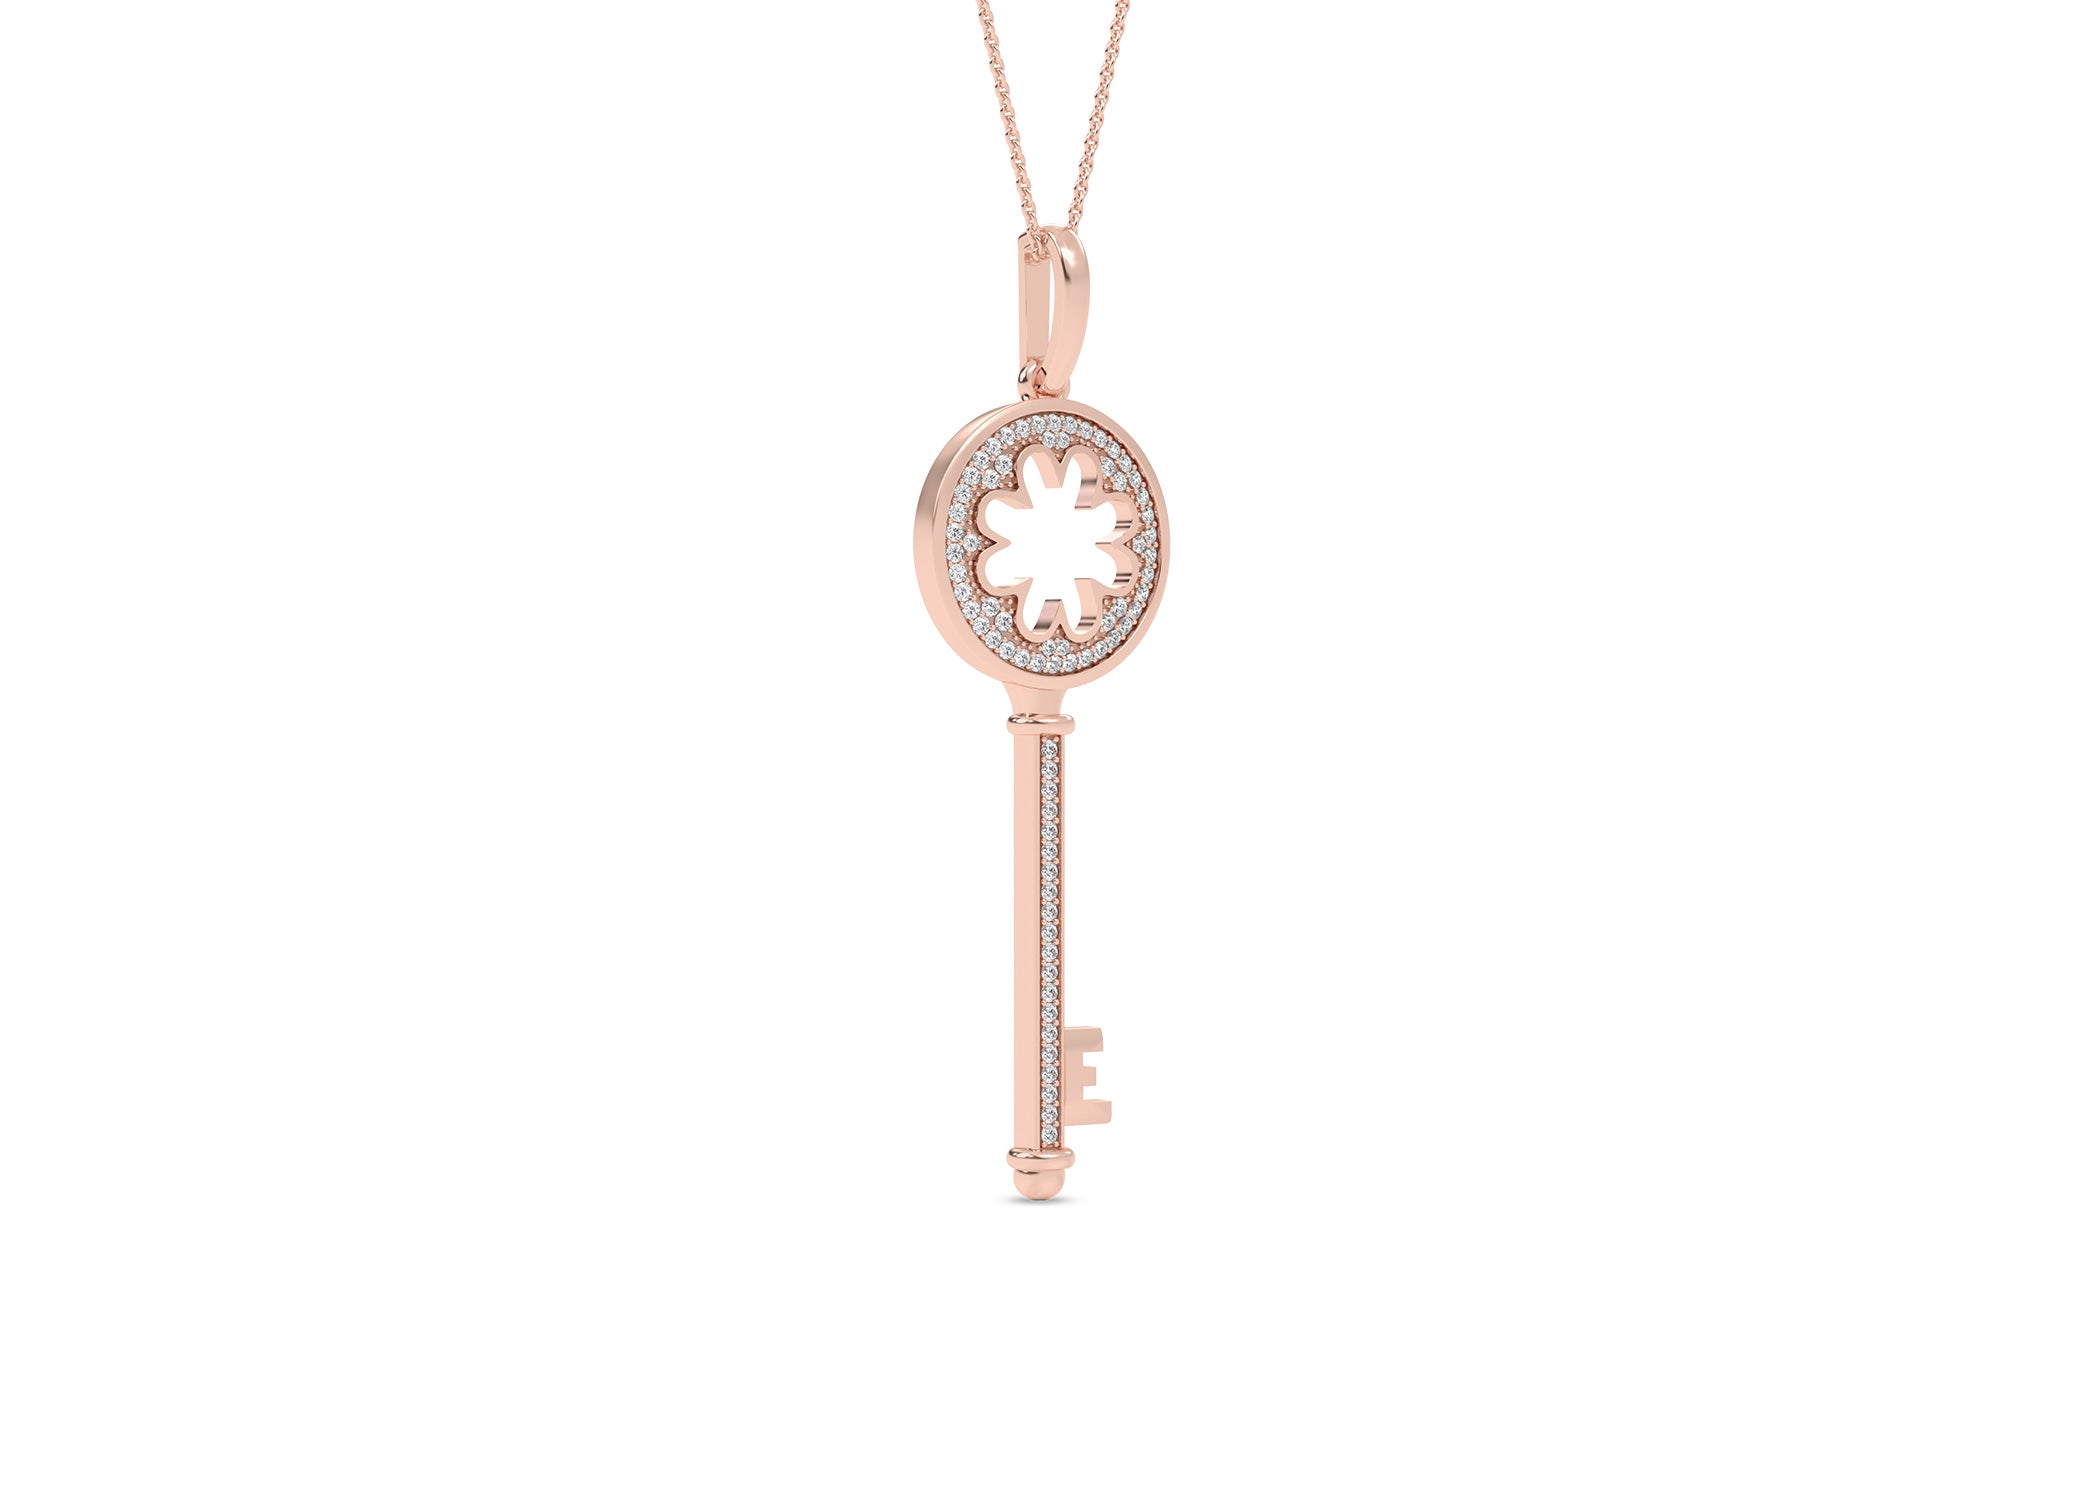 Blooming Key Necklace Replica